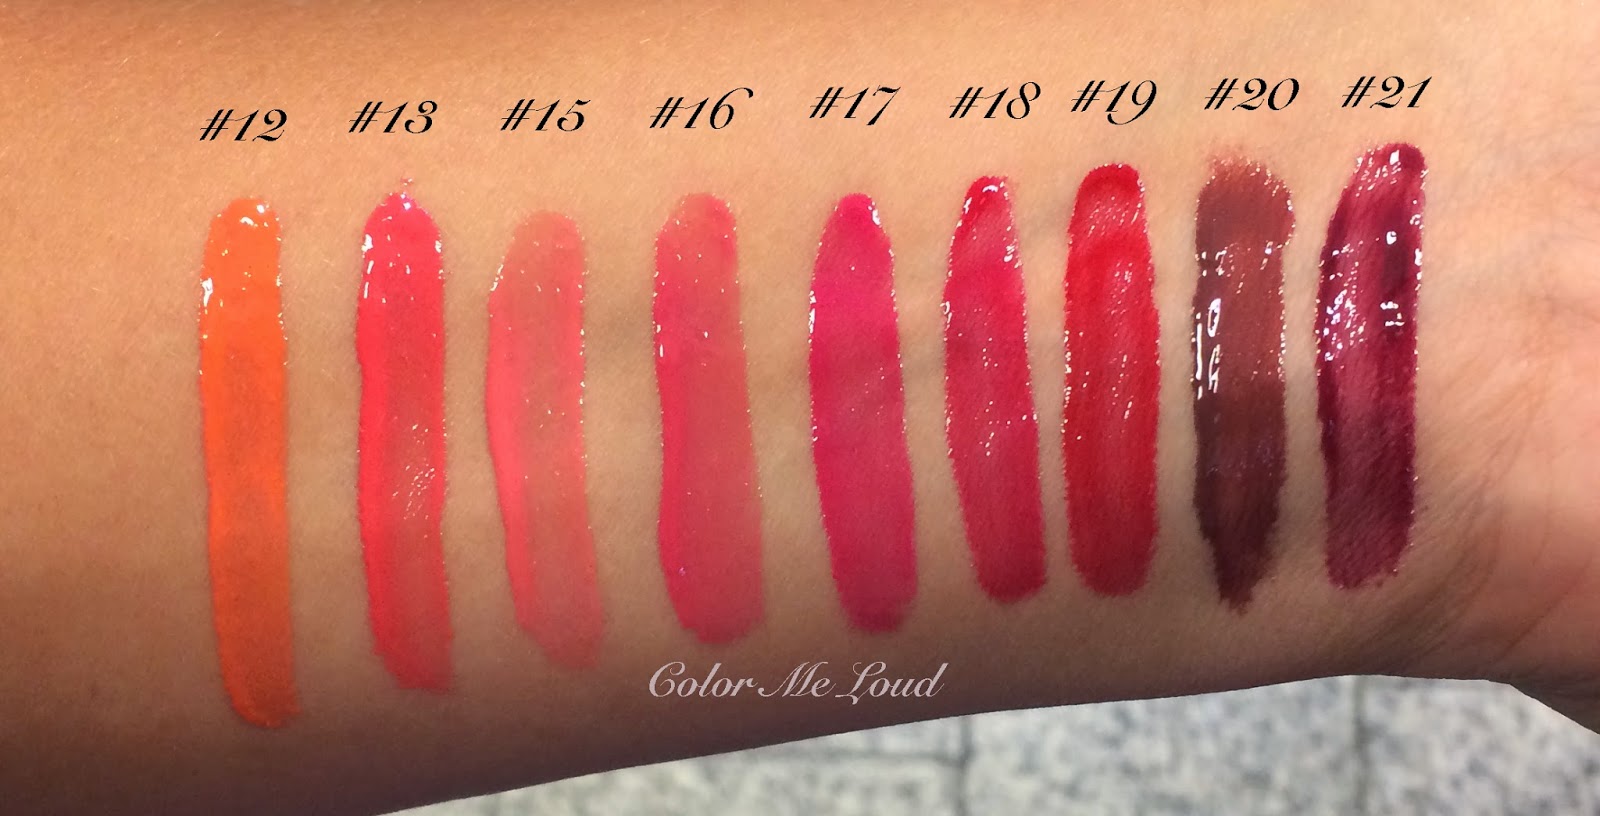 Chanel Rouge Allure Gloss One Click Collection Swatches, All Glosses, Nail Polishes Expression, #639 Exception and new Rouge Allure Lipstick Shades, & FOTD | Color